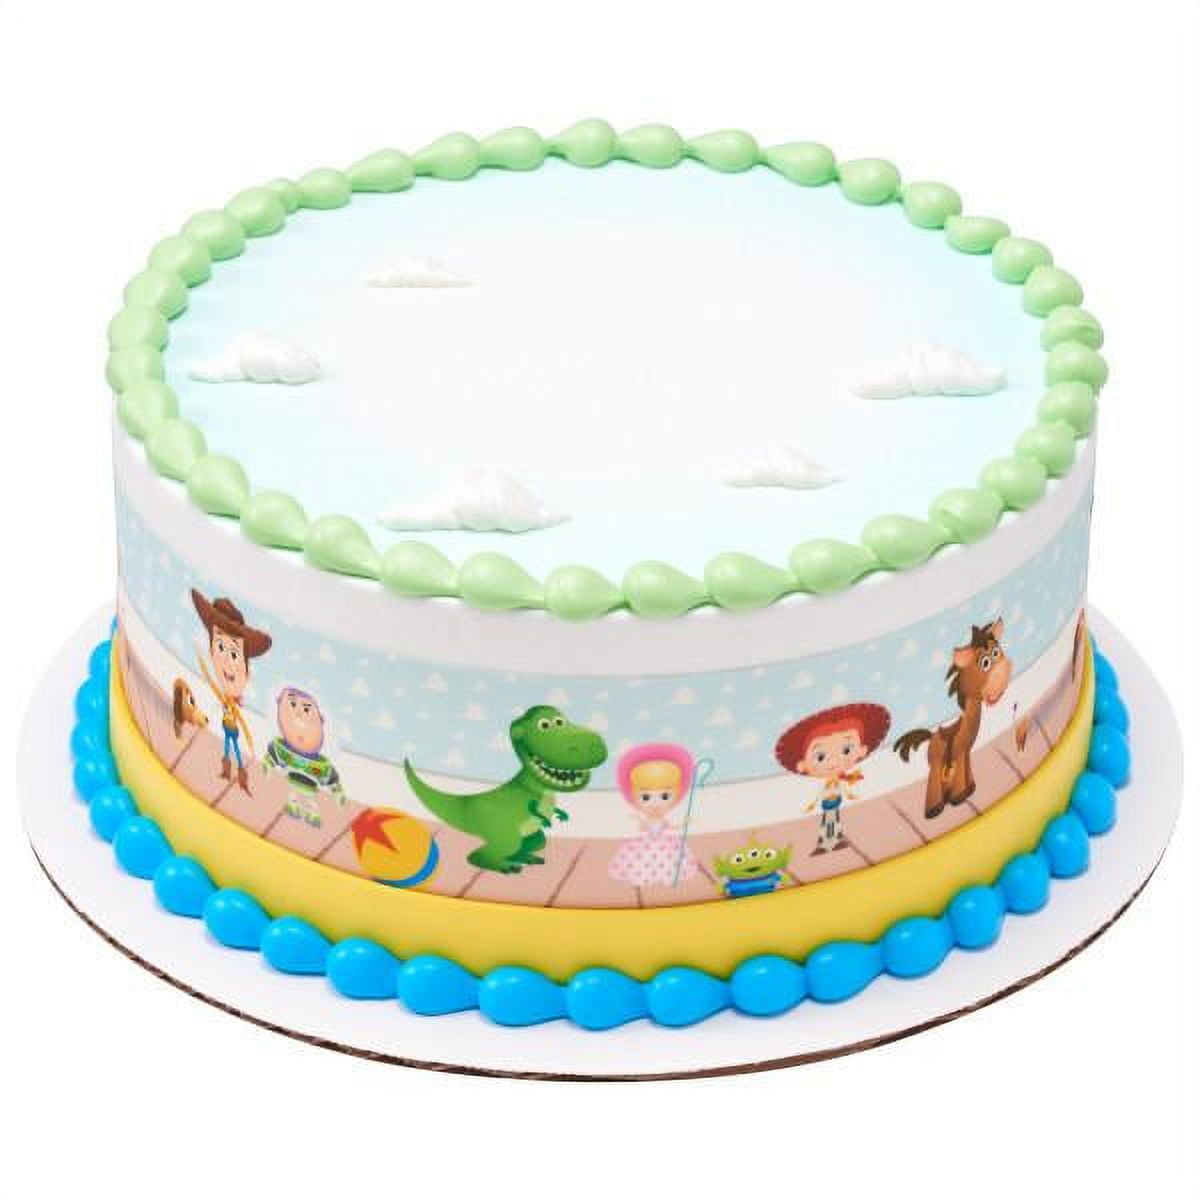 BUY BAKING AND CAKE DECORATIONS ONLINE. THE CAKE STORY - EDIBLE